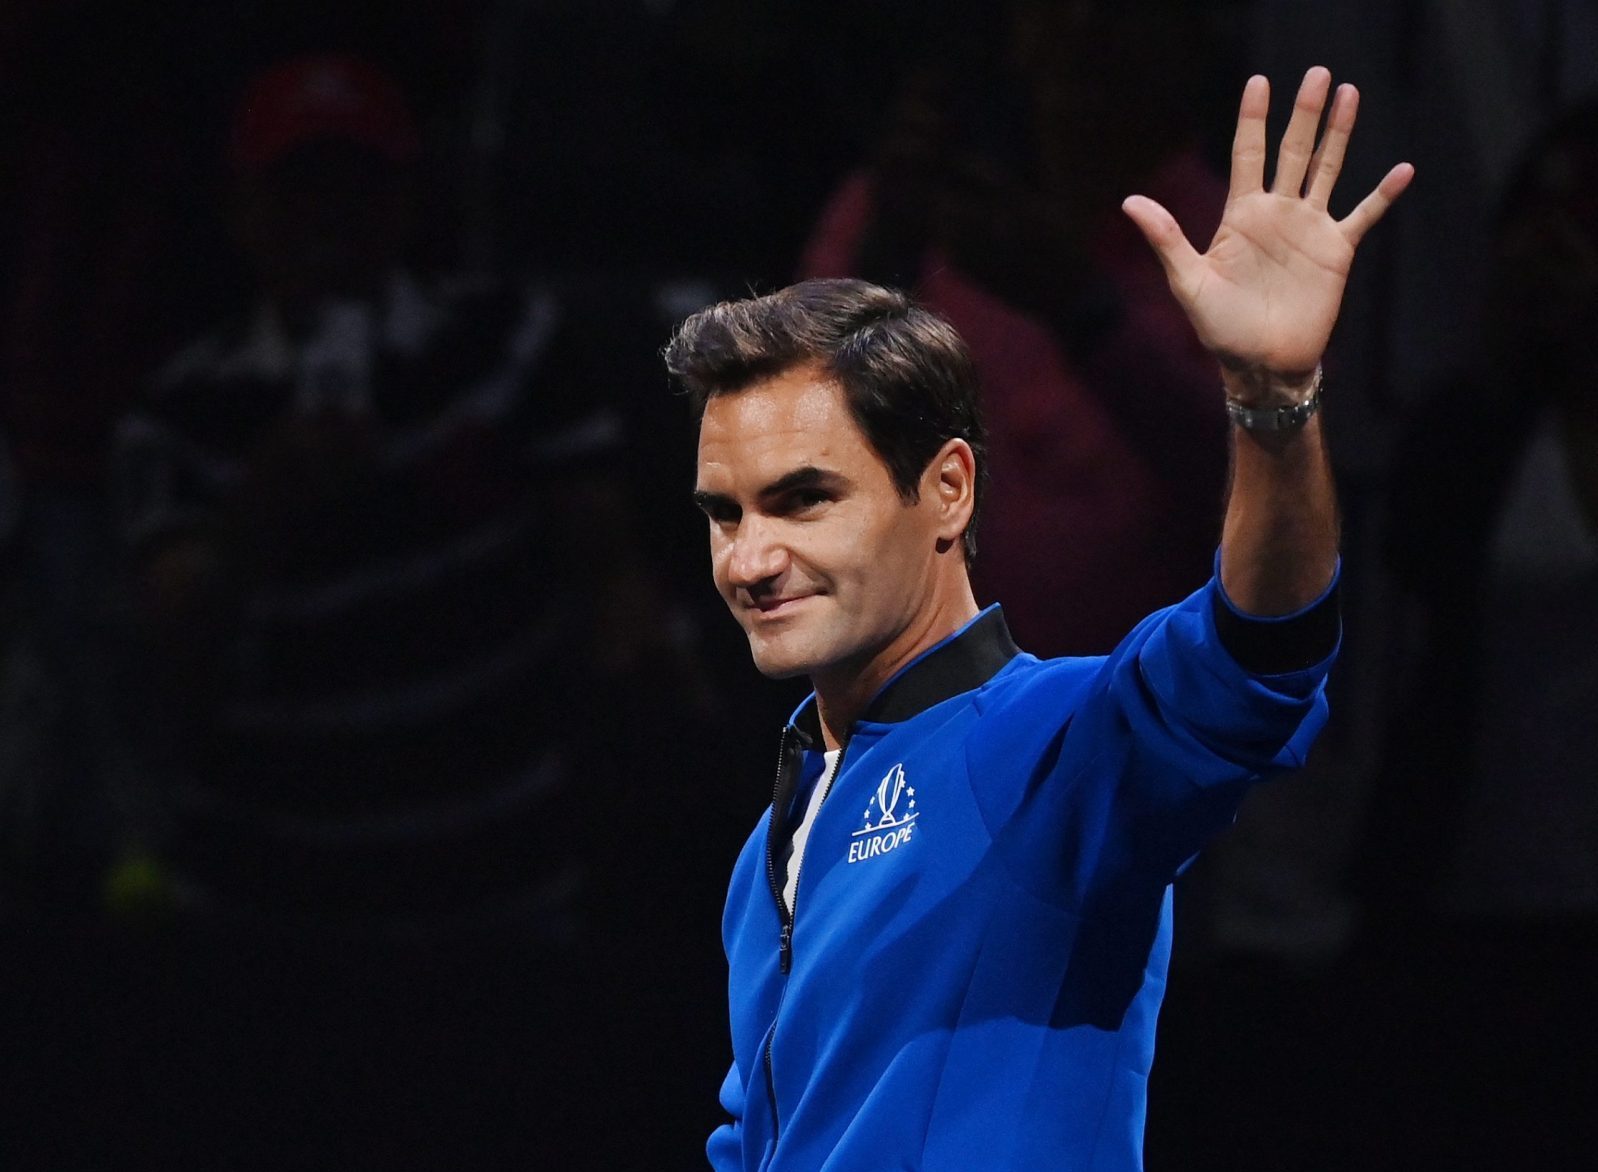 epa10203594 Team Europe's Roger Federer during Day 2 of the Laver Cup at the O2 Arena in London, Britain 24 September 2022. Federer played his last game before retirement on 23 September 2022.  EPA/ANDY RAIN